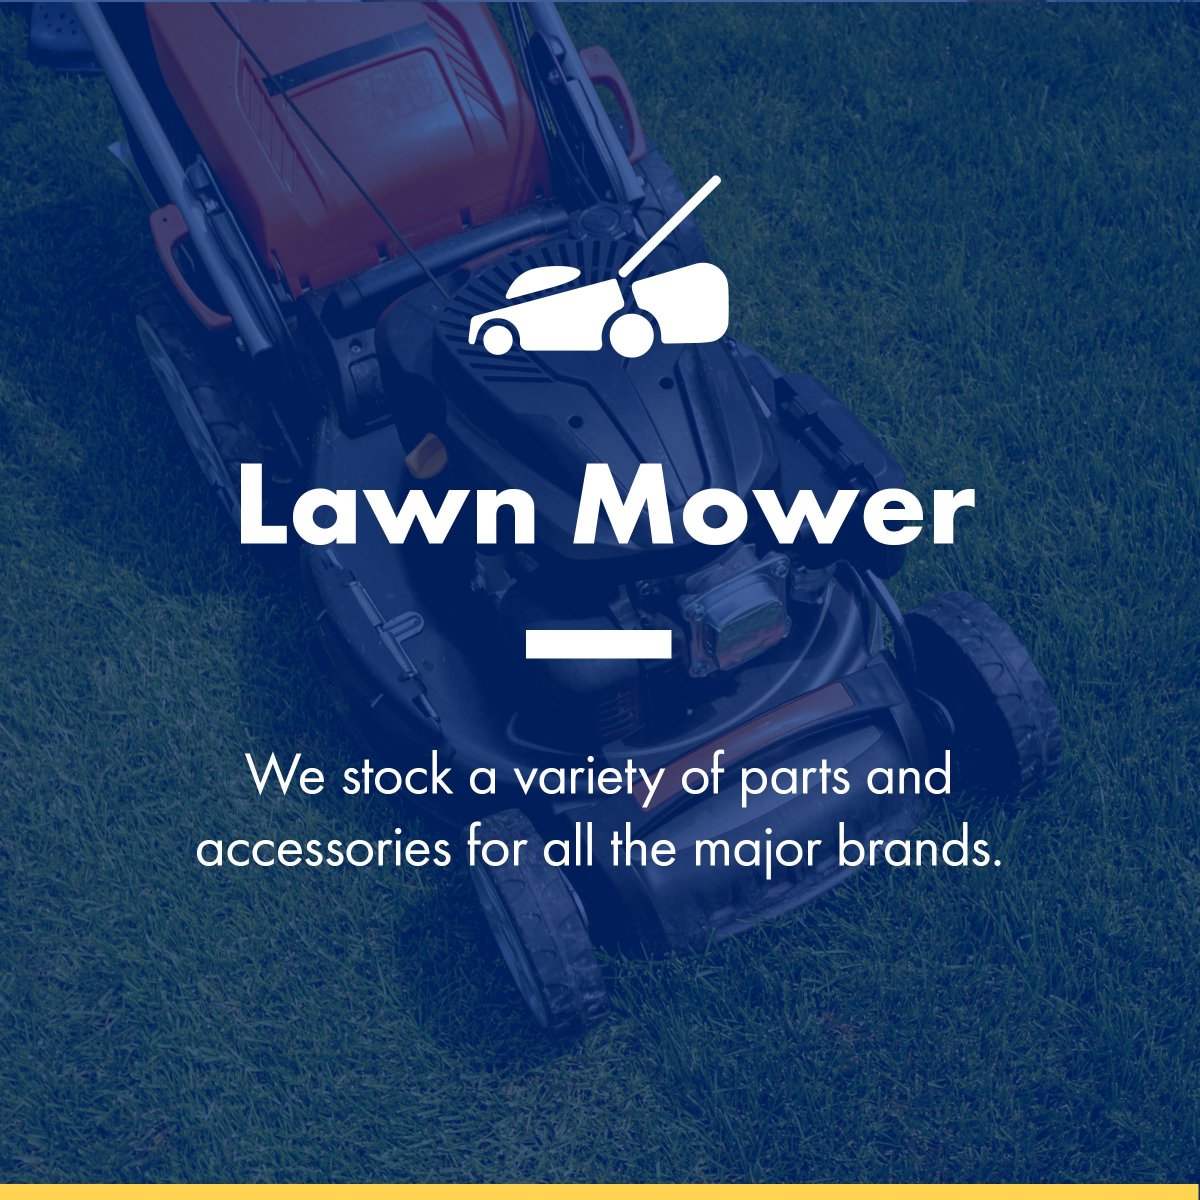 Lawn Mowers - We stock a variety of parts and accessories for all the major brands.

buff.ly/3M3gSEE

#lawnmower #grasscutting #gardencare